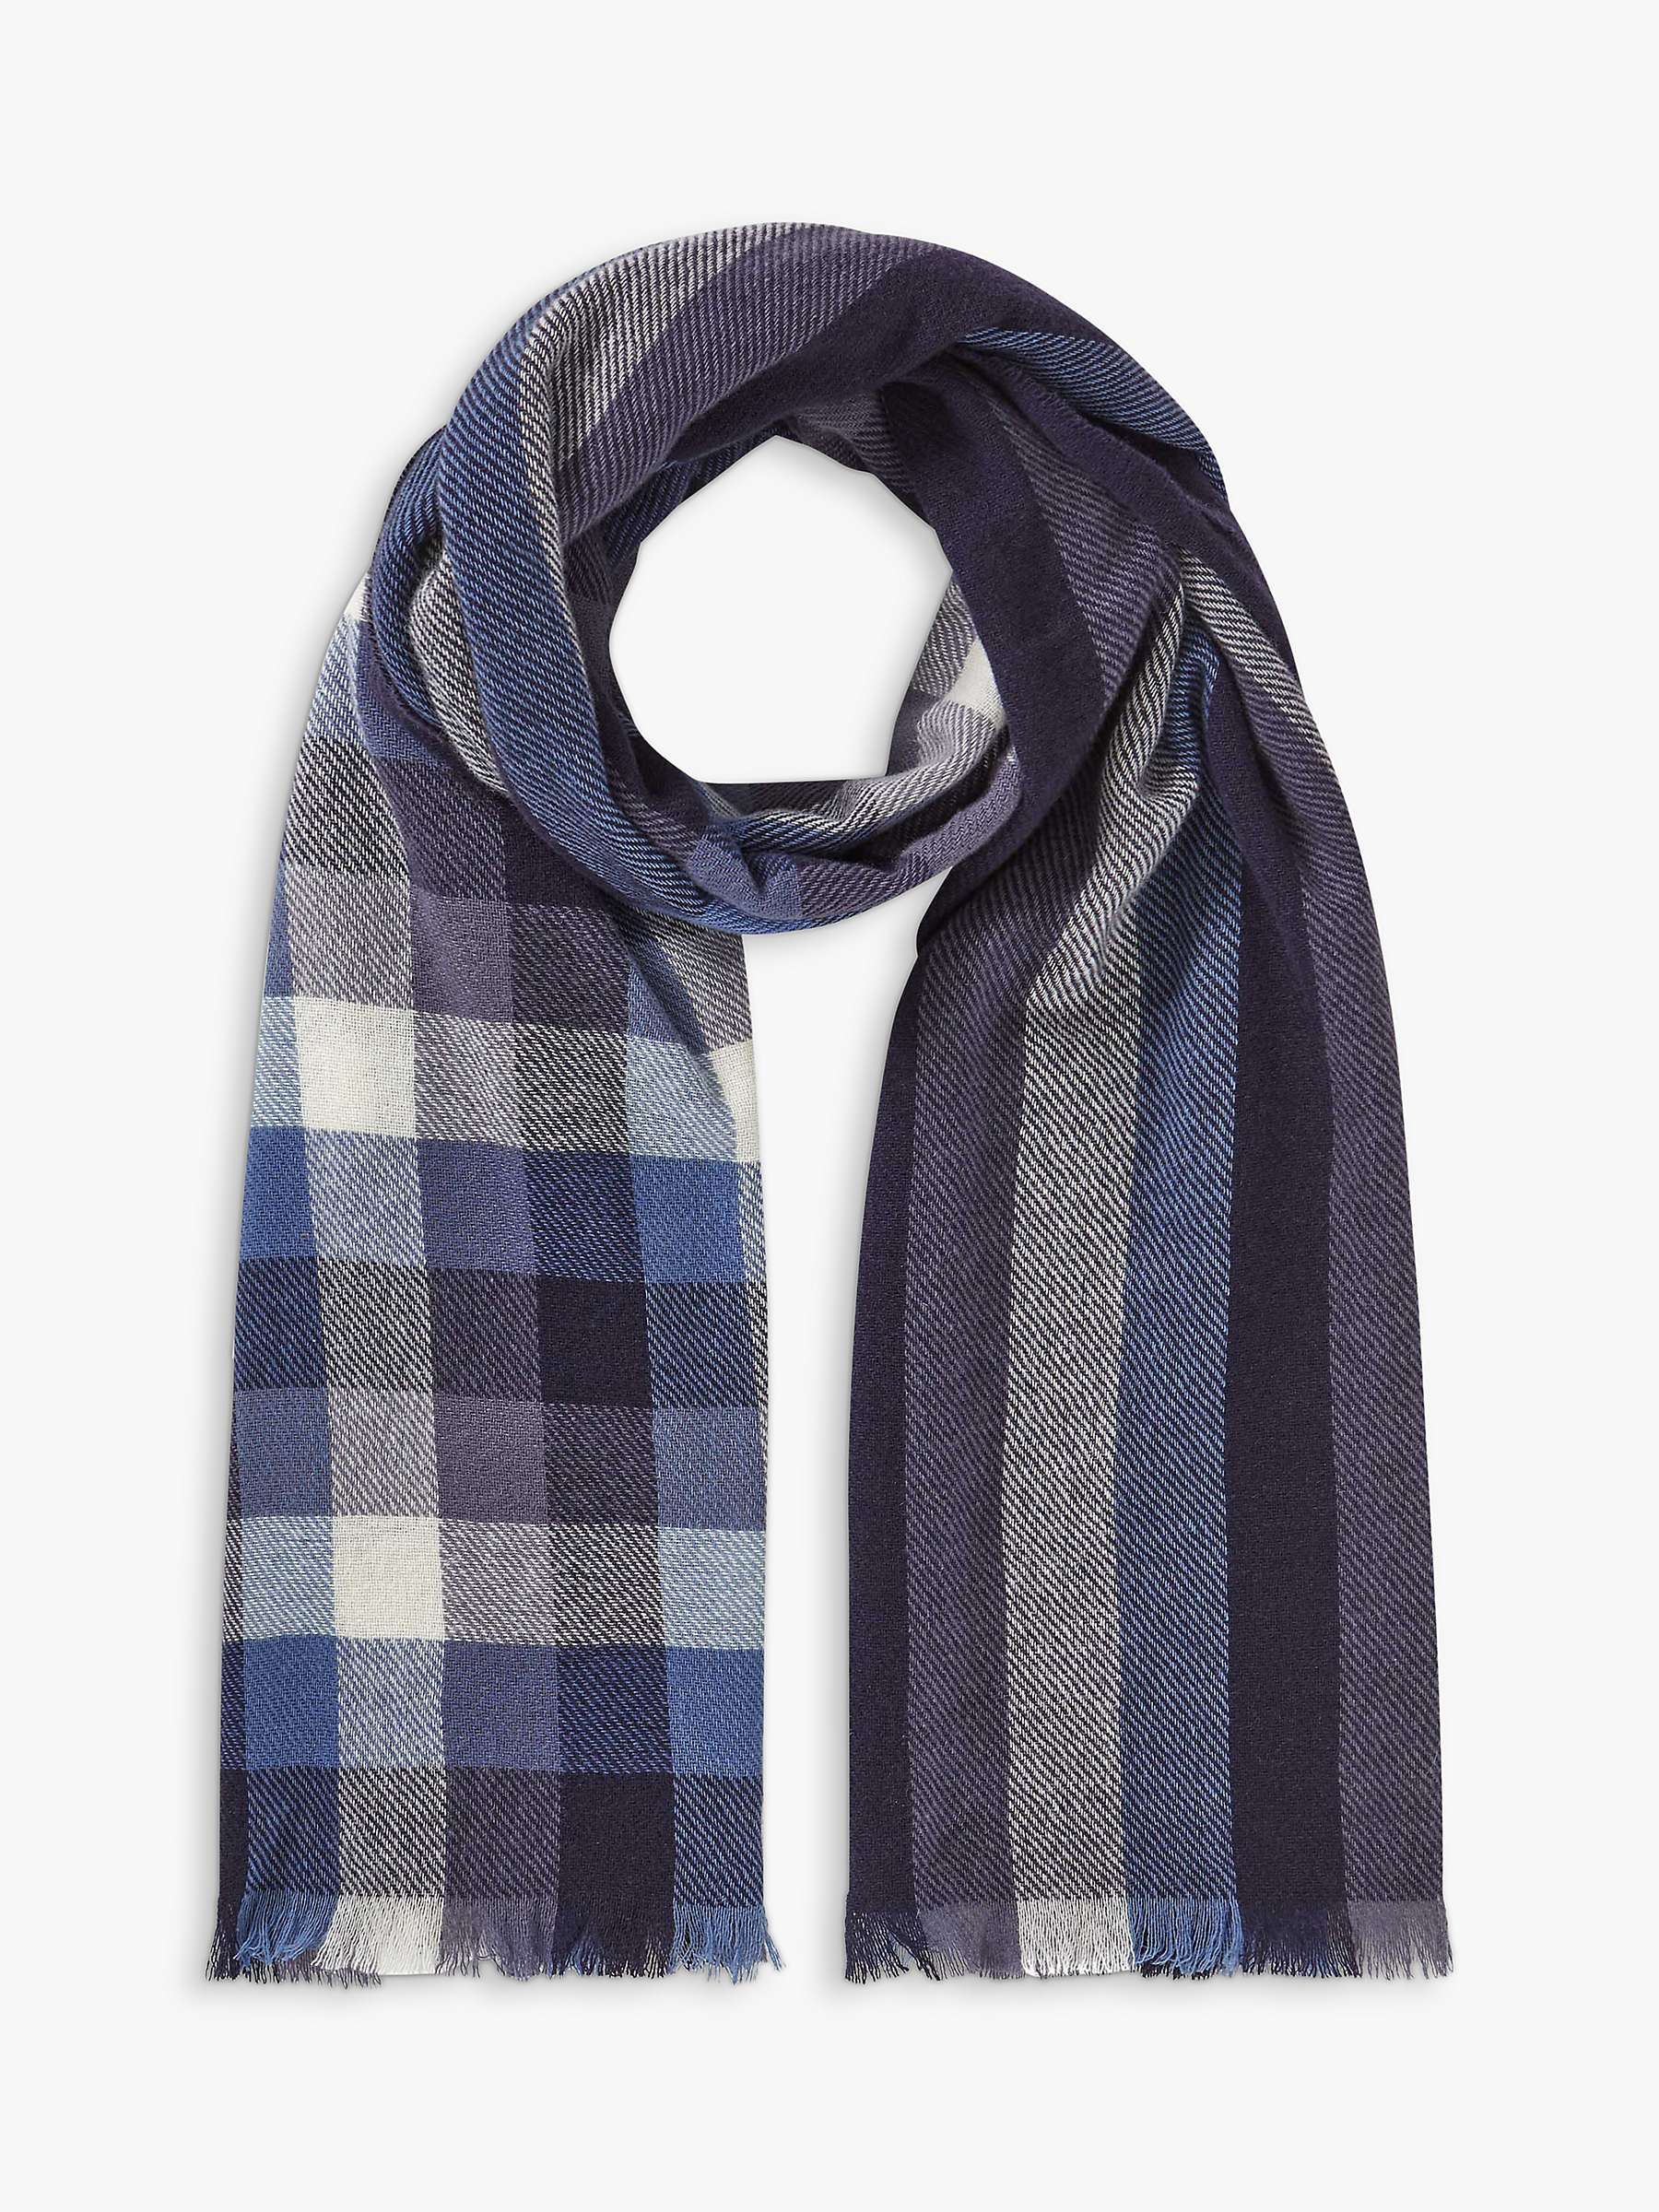 Buy Brora Cashmere Striped and Check Stole Scarf Online at johnlewis.com